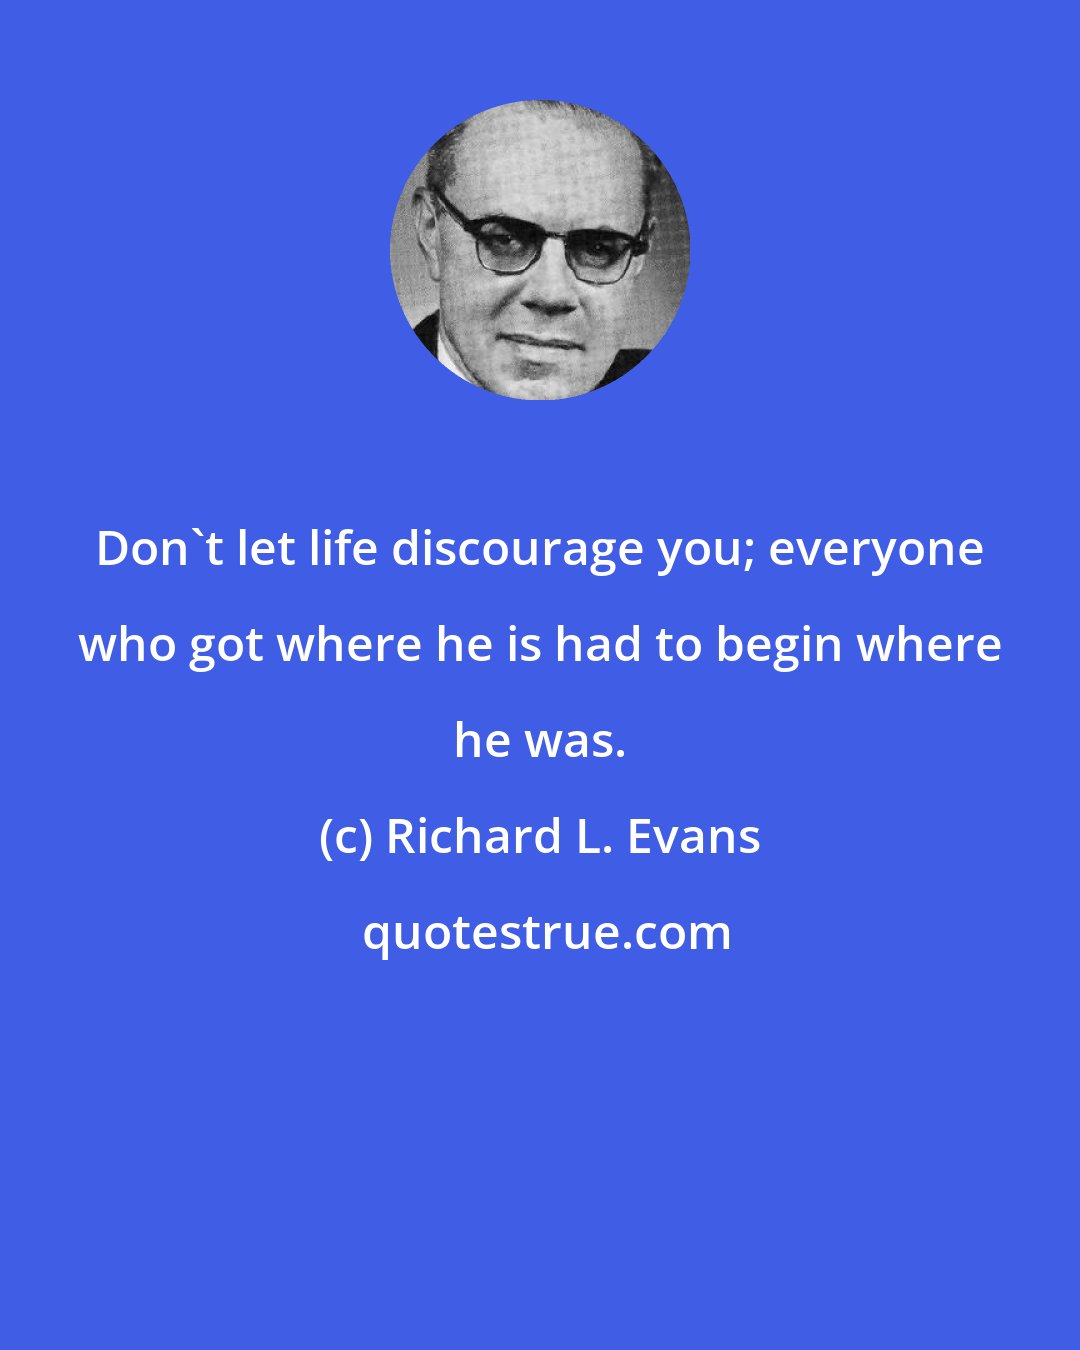 Richard L. Evans: Don't let life discourage you; everyone who got where he is had to begin where he was.